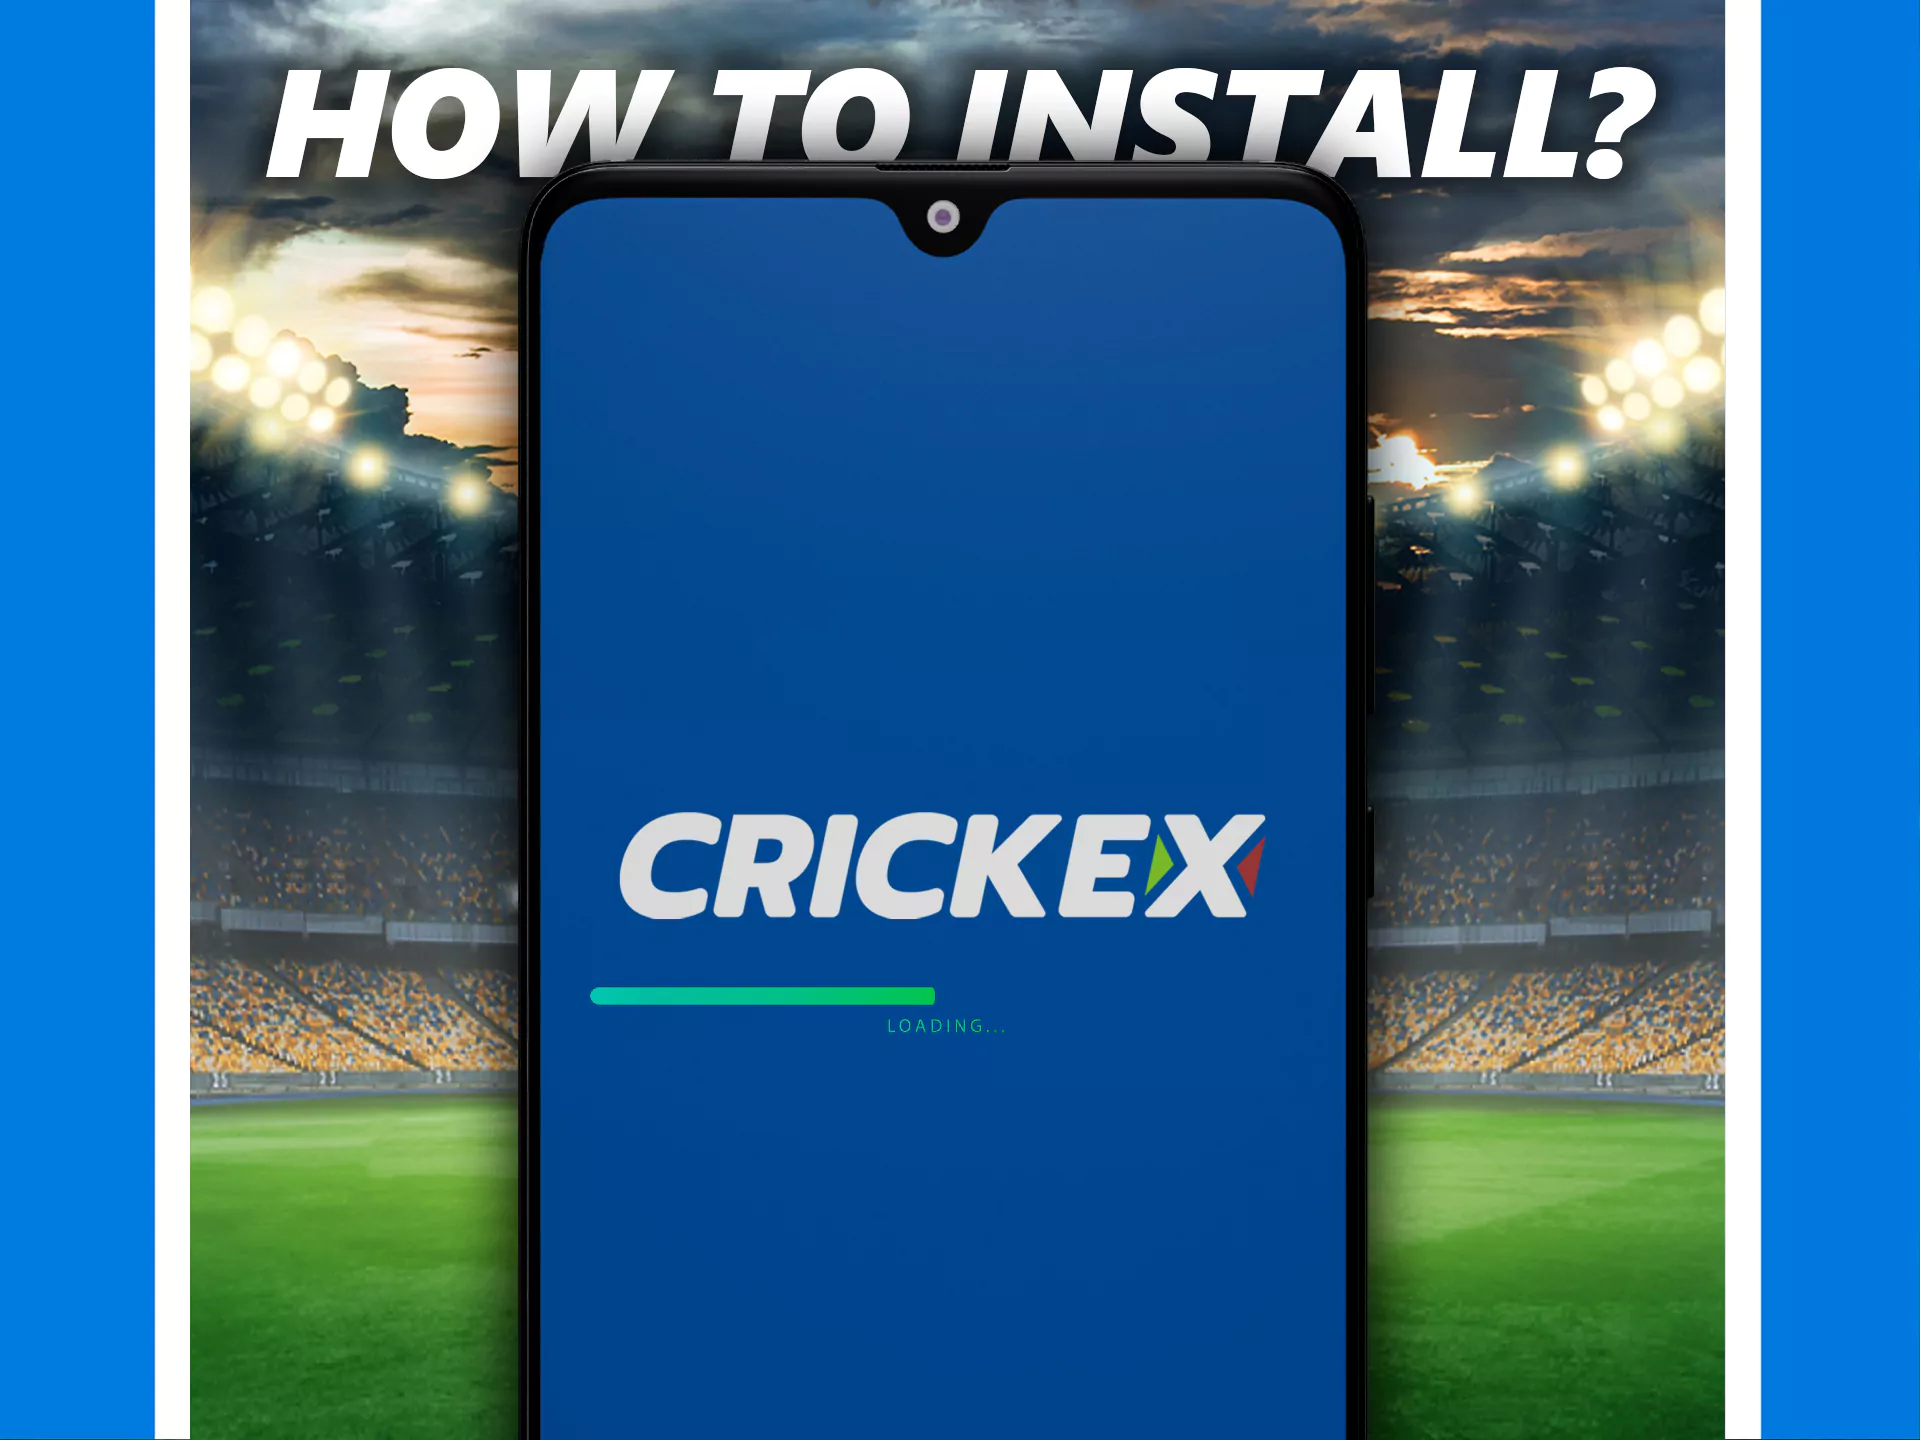 Install the Crickex app following the instructions below.